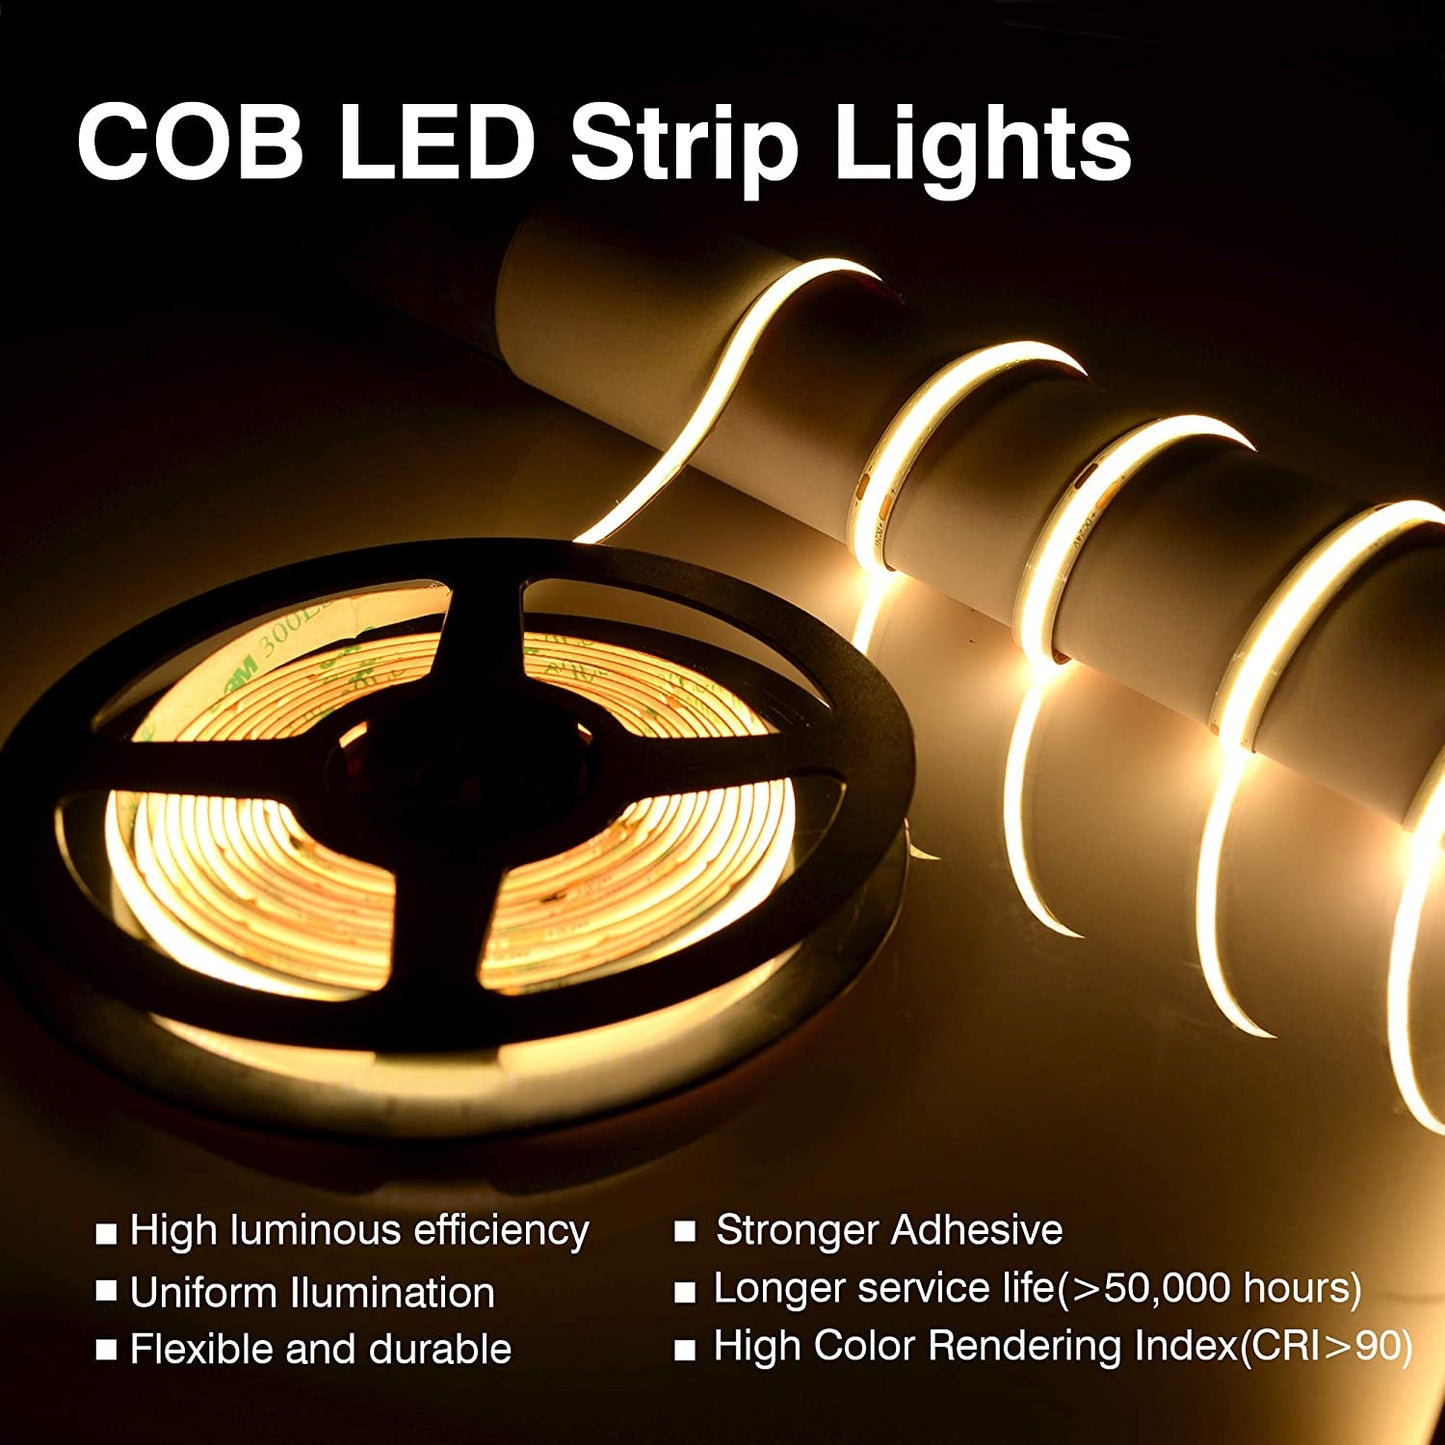 Send inquiry for 12V Cuttable LED Strips 5mm COB Under Cabinet Tape Lighting with RoHS, CE to high quality Cuttable LED Strips supplier. Wholesale Under Cabinet Tape Lighting directly from China Cuttable LED Strips manufacturers/exporters. Get a factory sale price list and become a distributor/agent-vstled.com